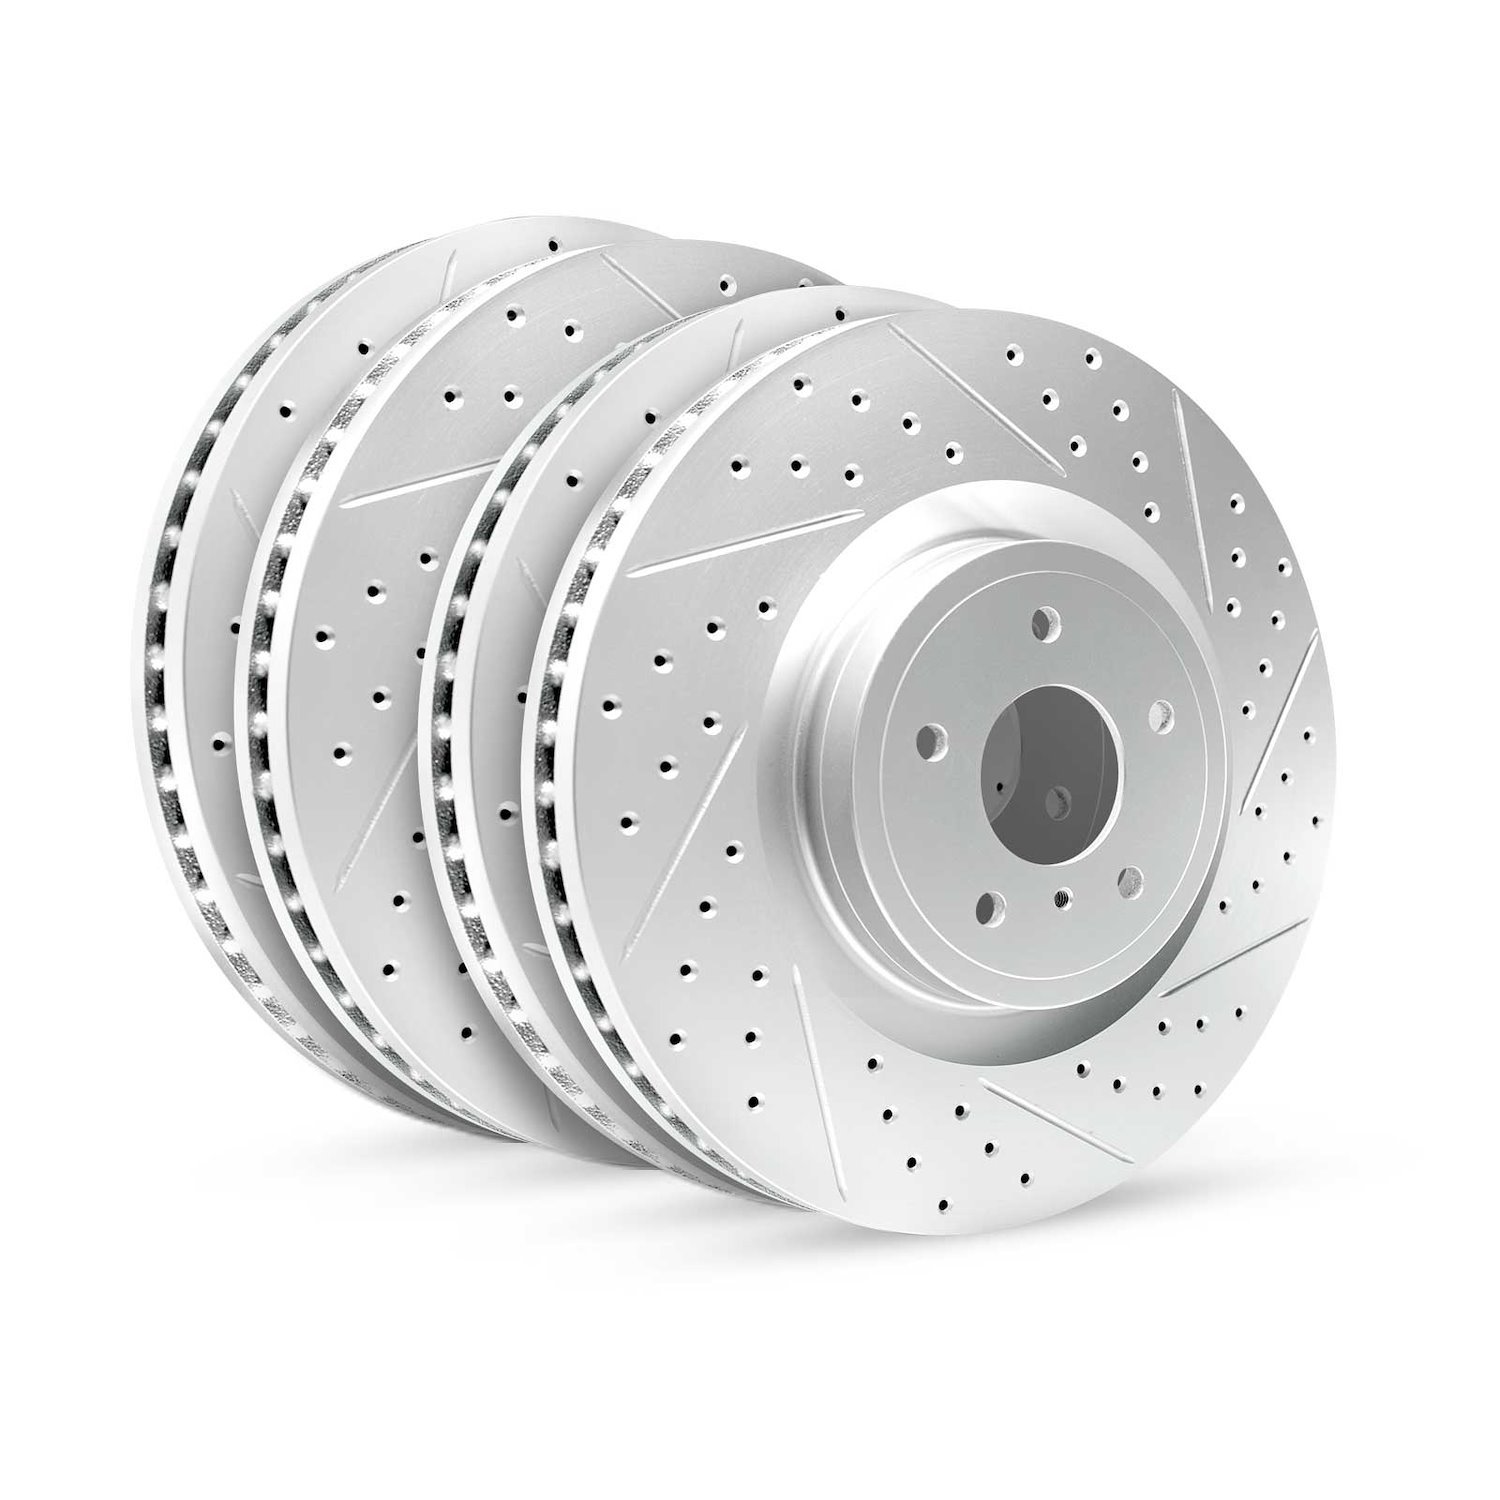 GEO-Carbon Drilled/Slotted Rotors, 2008-2013 BMW, Position: Front/Rear